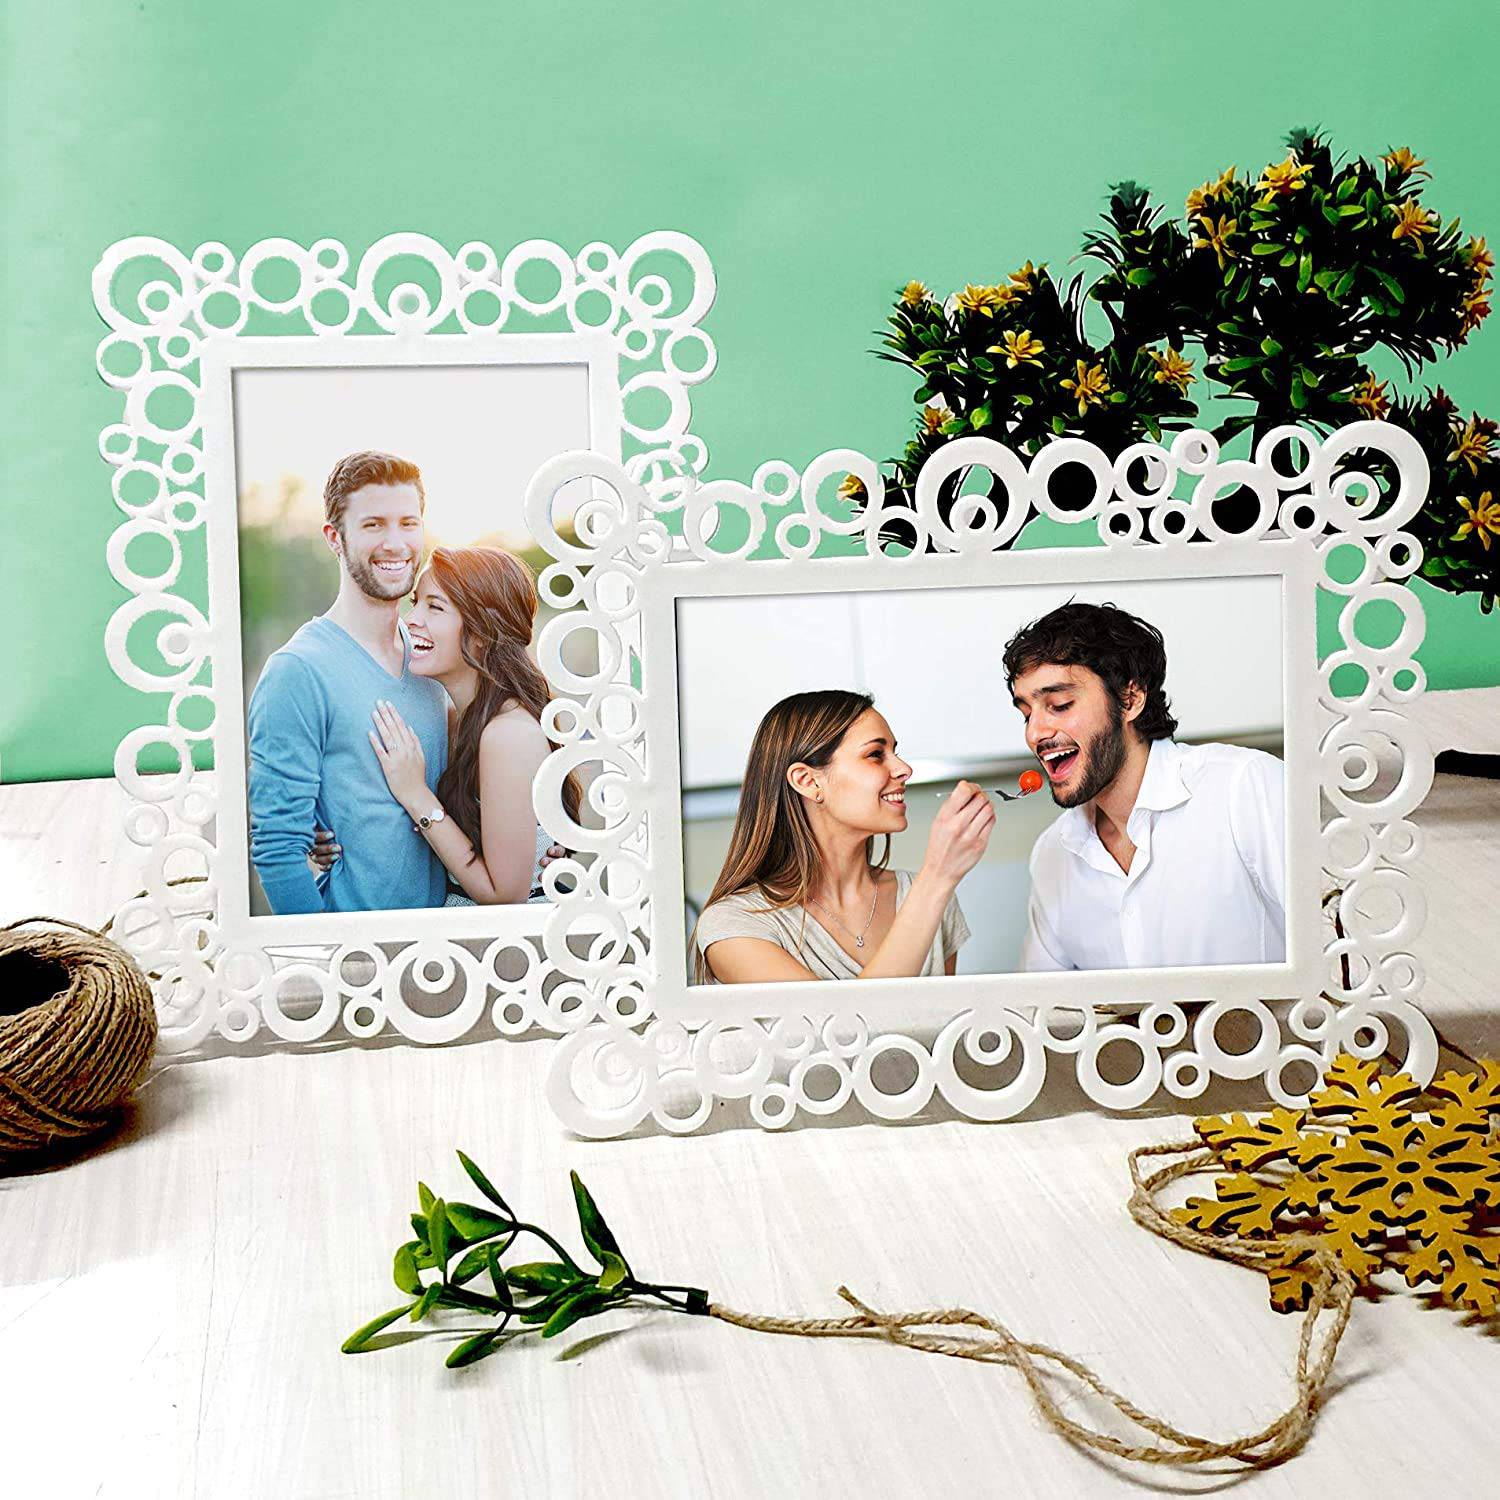 Decoralicious White Flower Photo Frame/Wall Hanging for Home Décor - YuvaFlowers